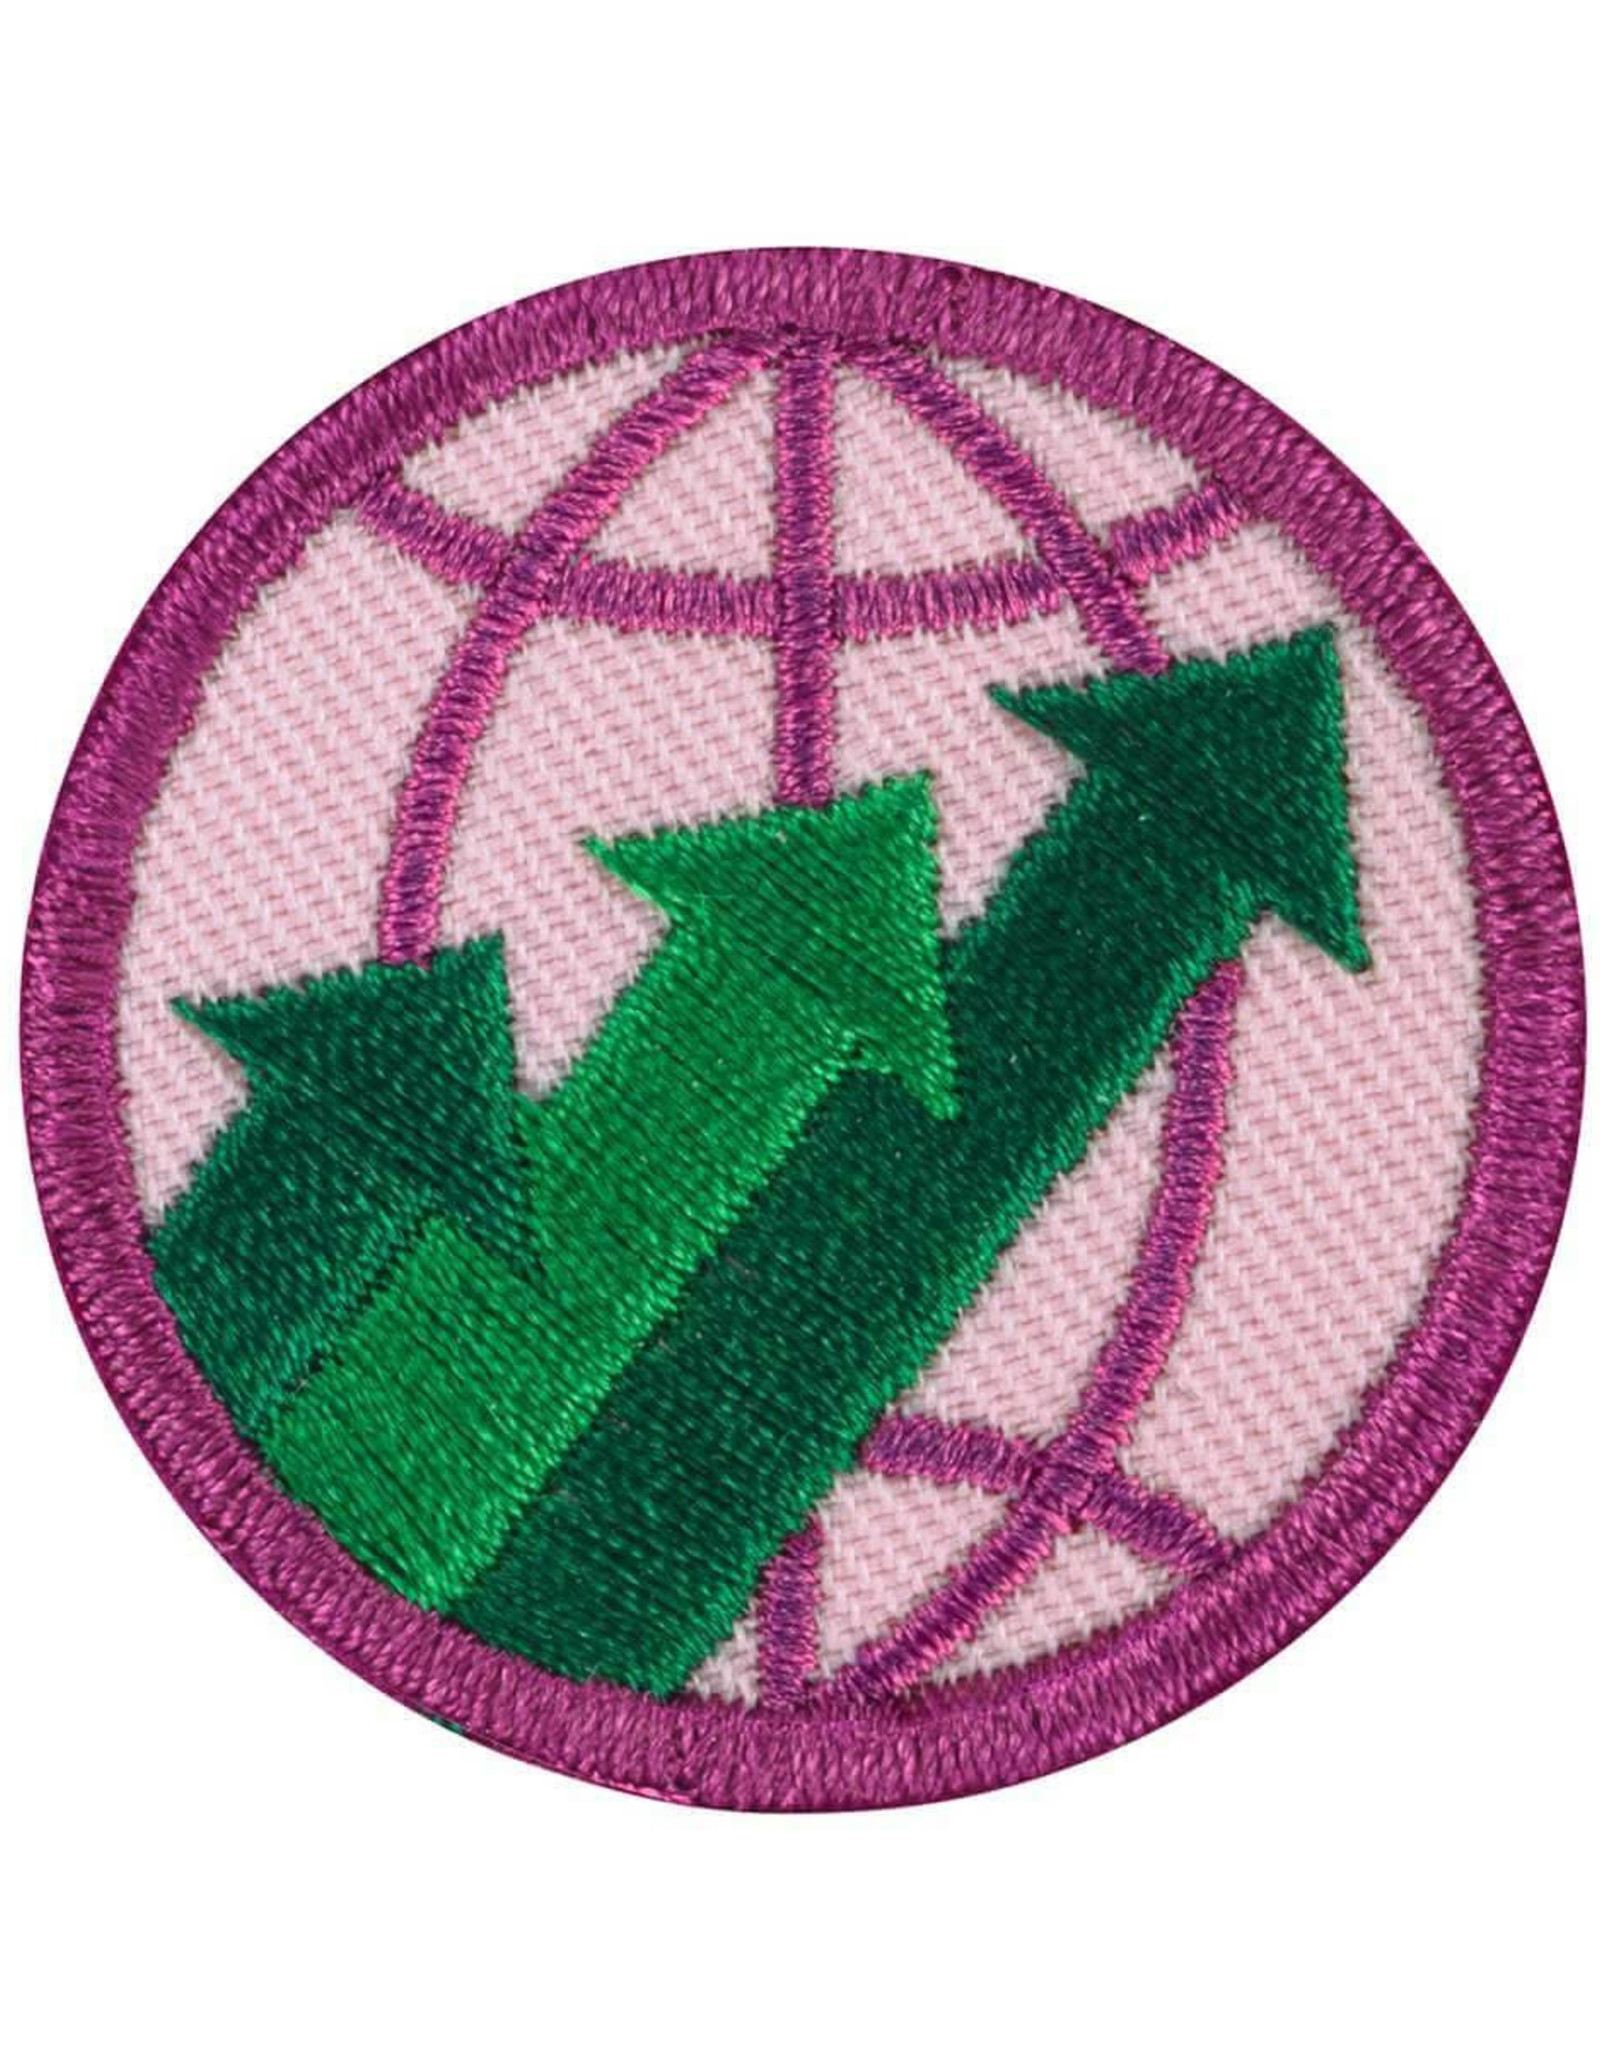 GIRL SCOUTS OF THE USA Junior Global Action Award Year 2 Badge